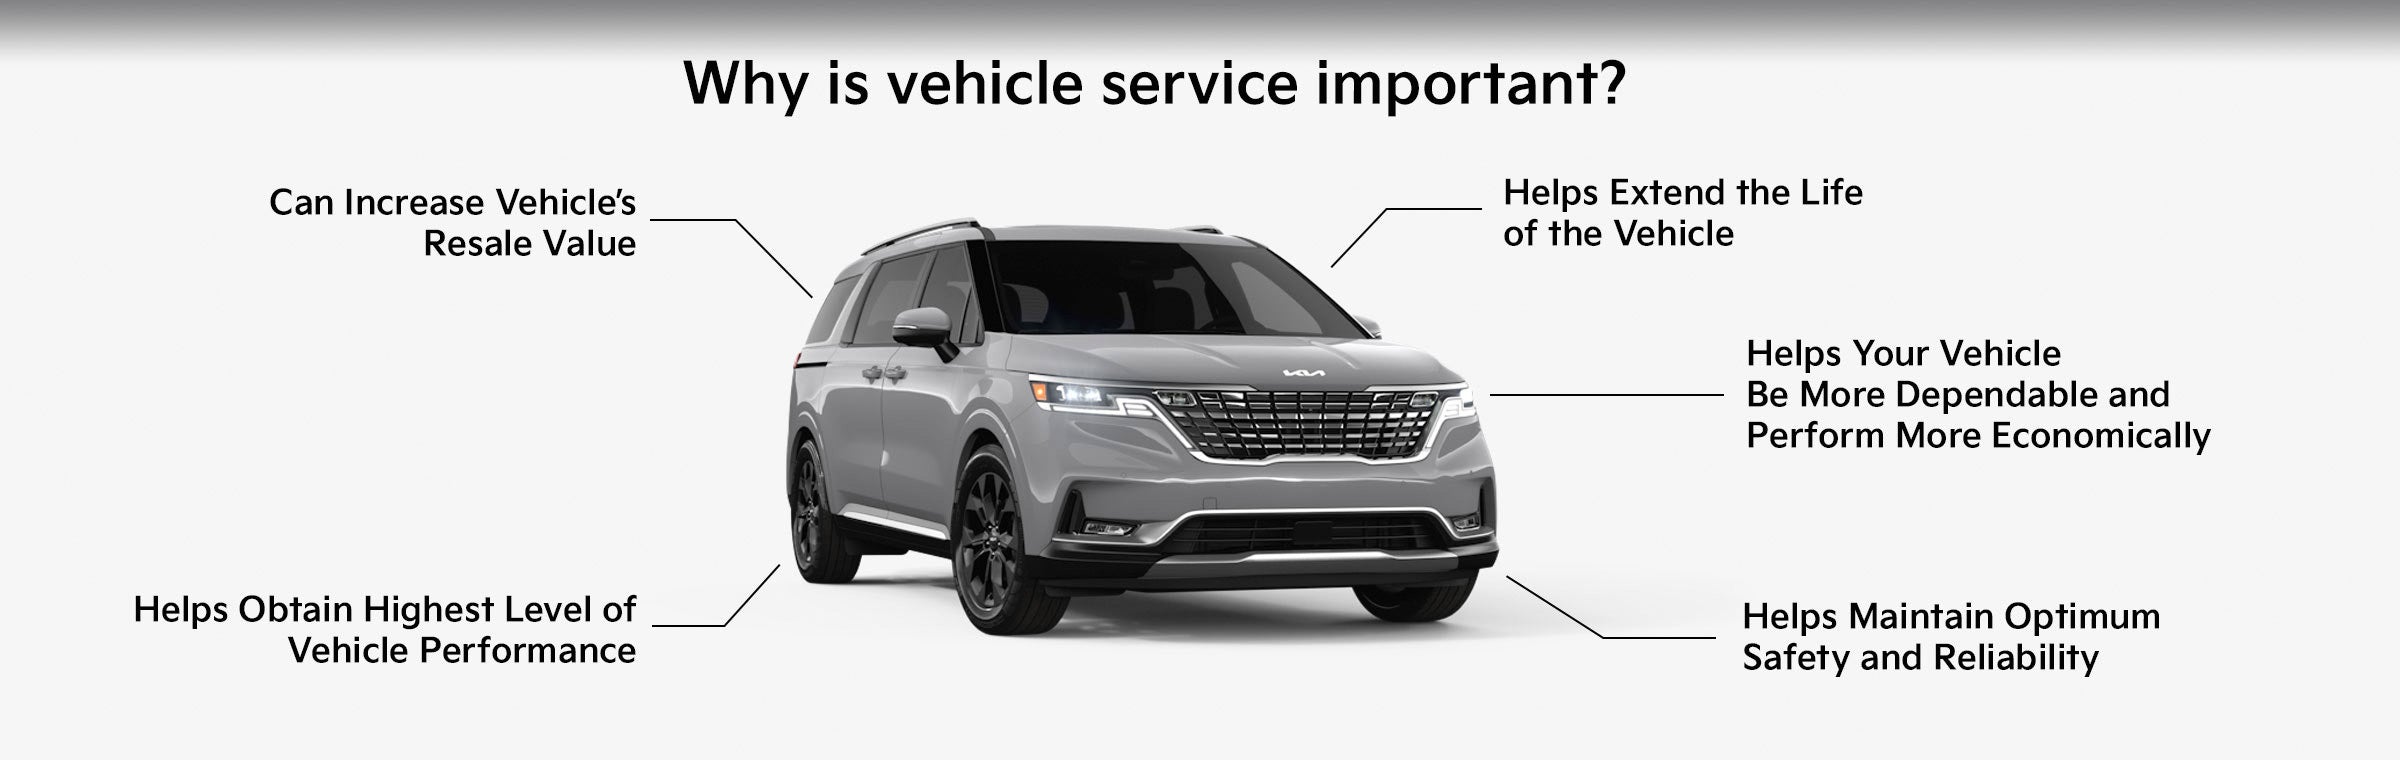 Why vehicle service is important click to schedule service